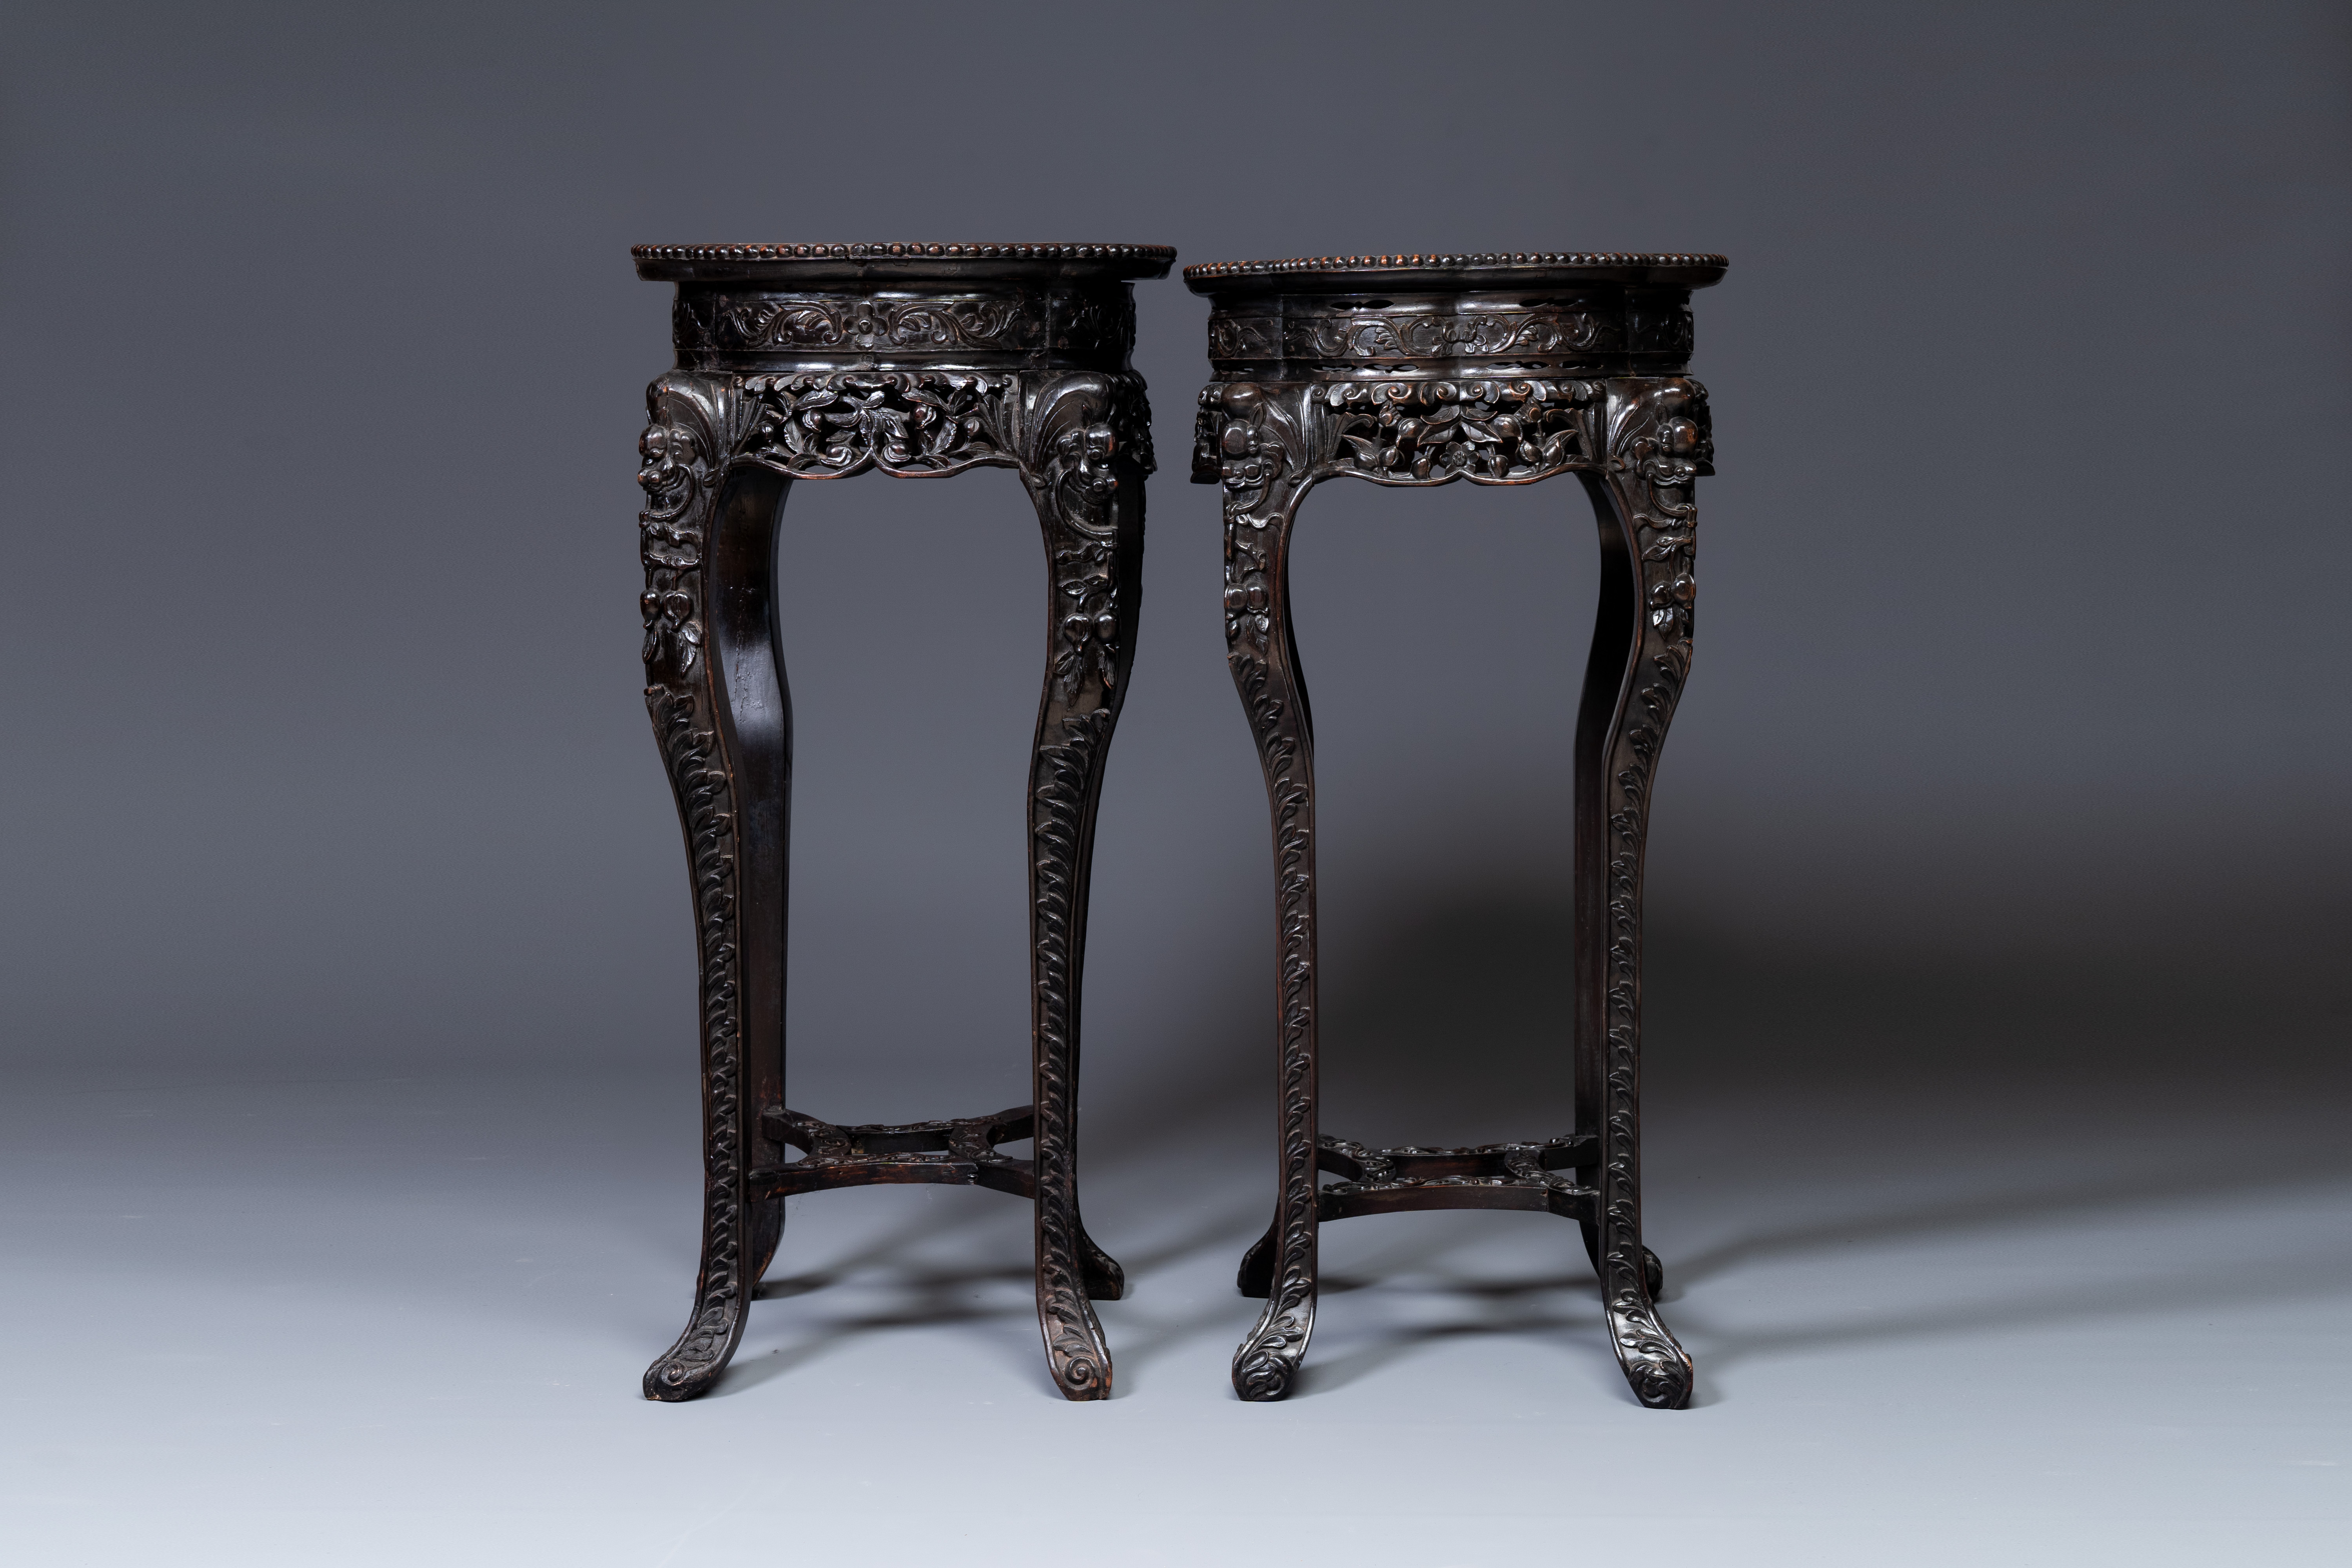 A pair of tall Chinese carved wooden stands with marble tops, 19th C. - Image 3 of 5